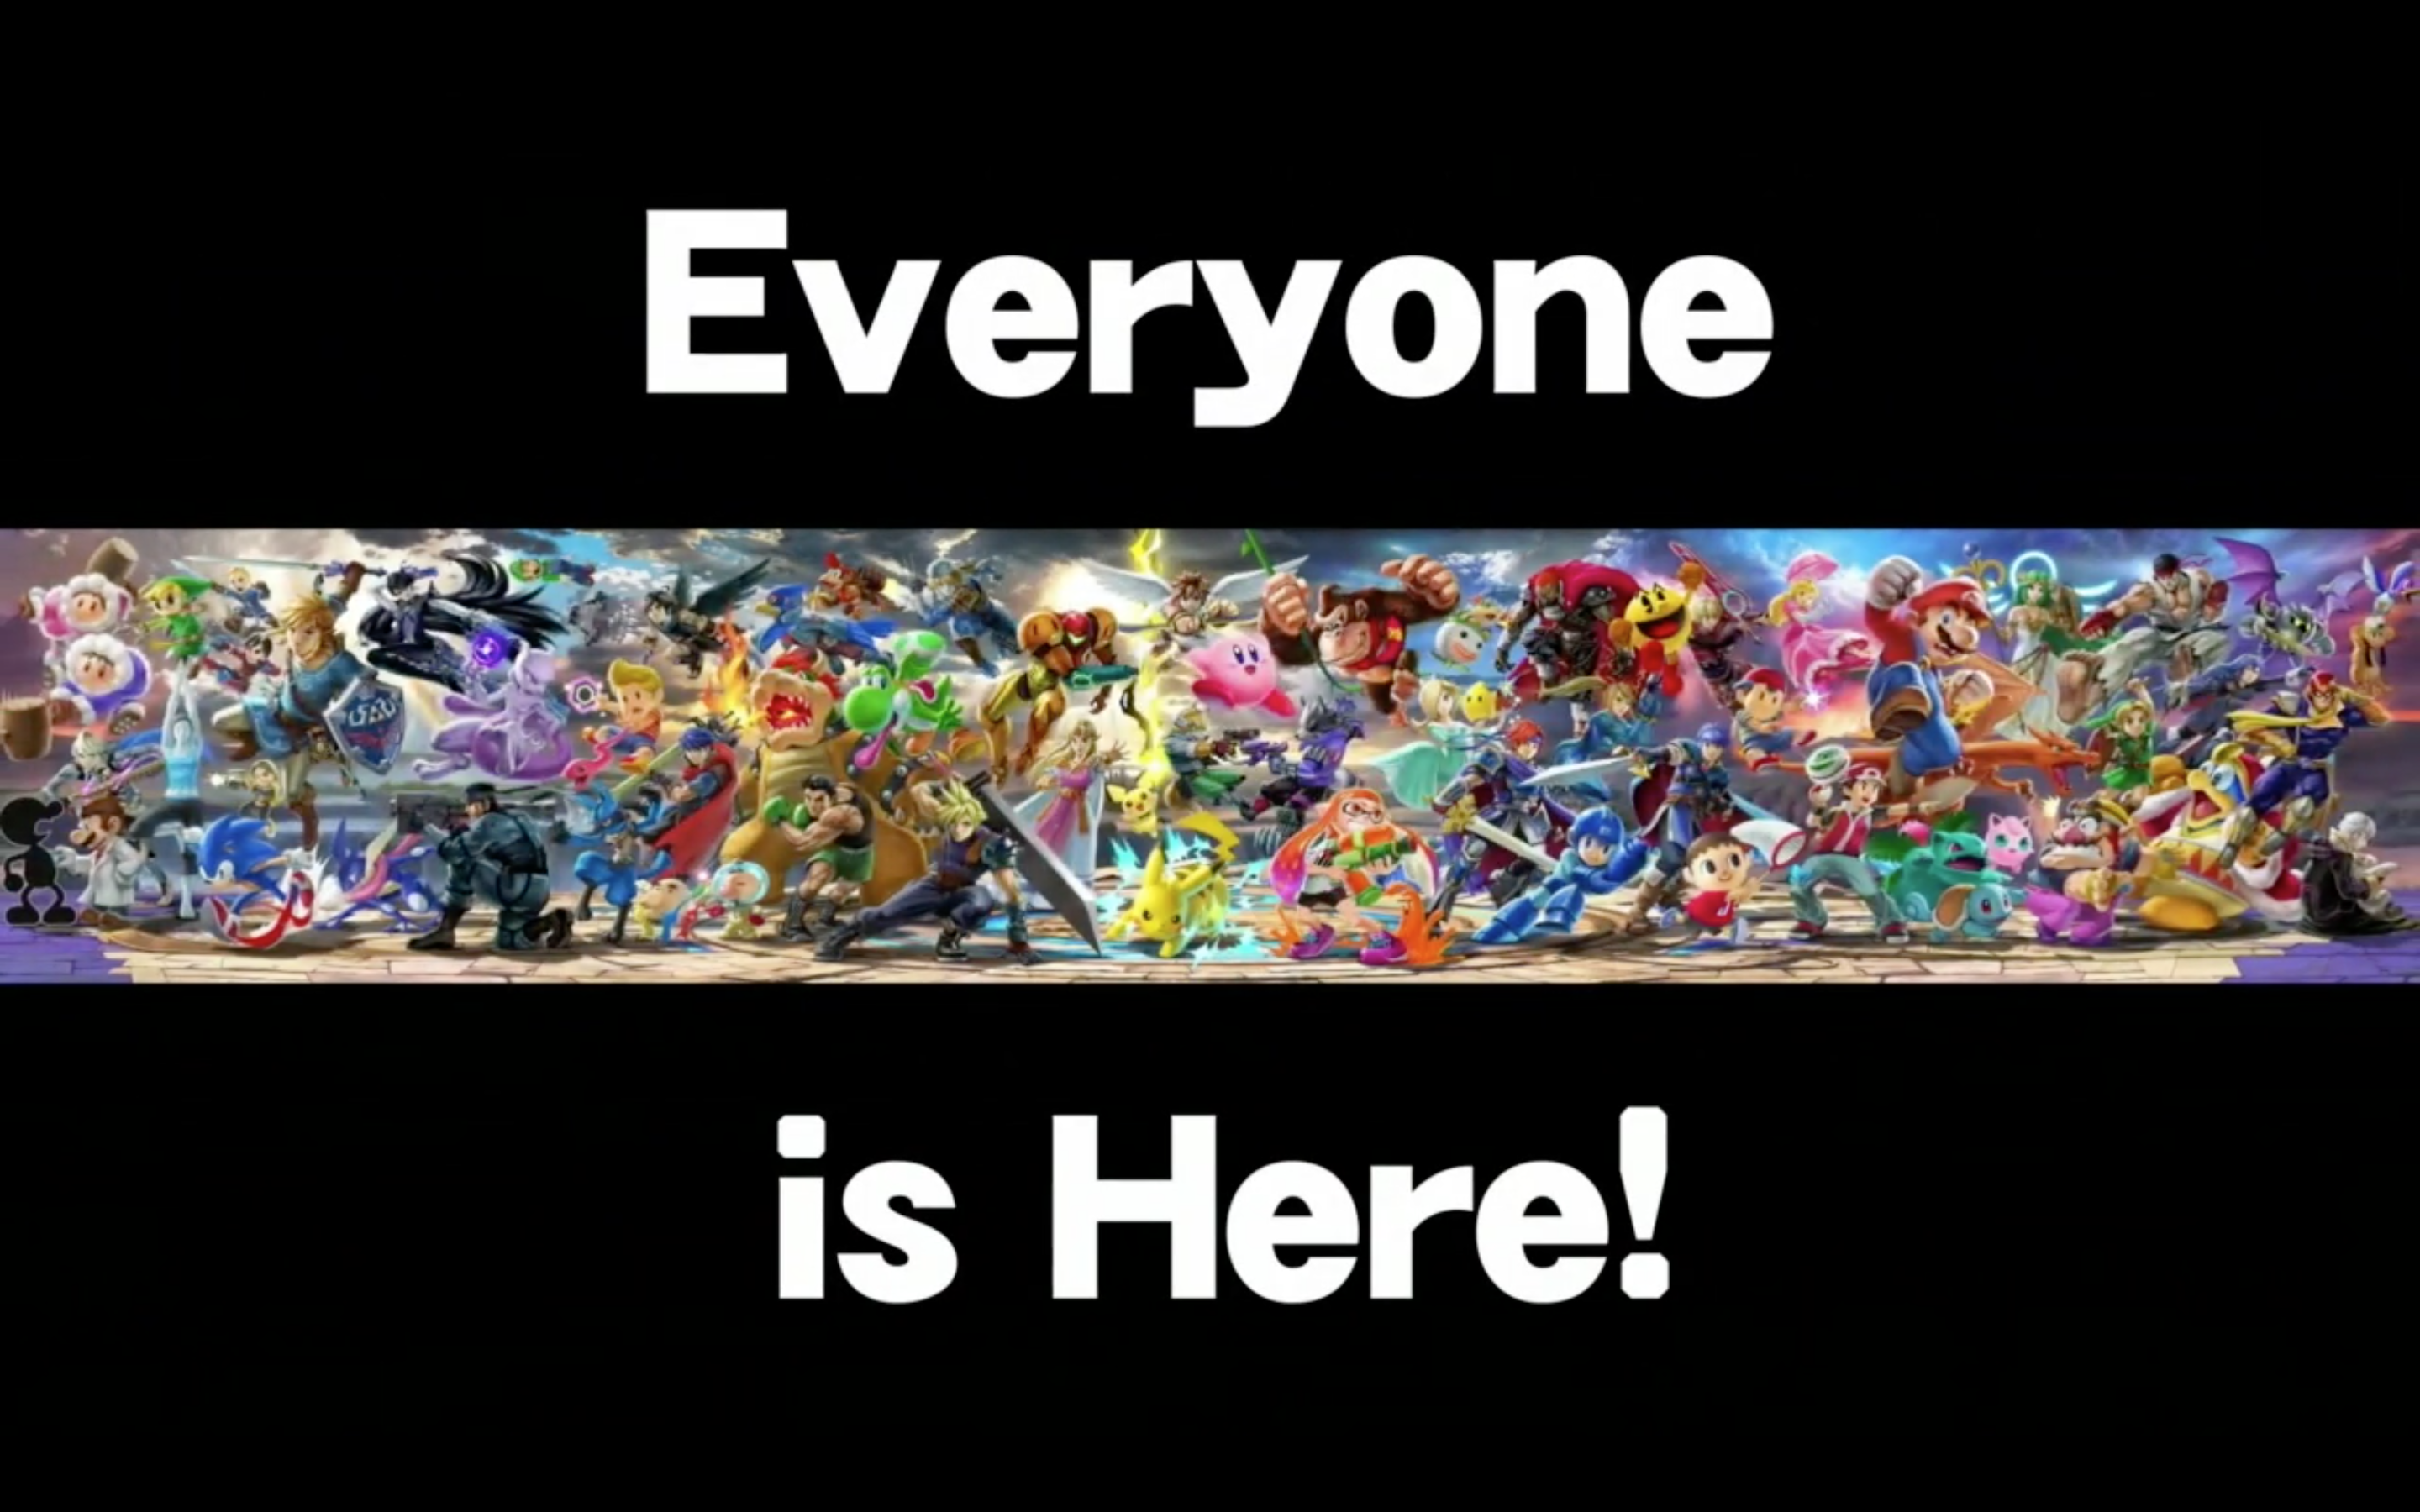 Every character in Super Smash Bros Ultimate